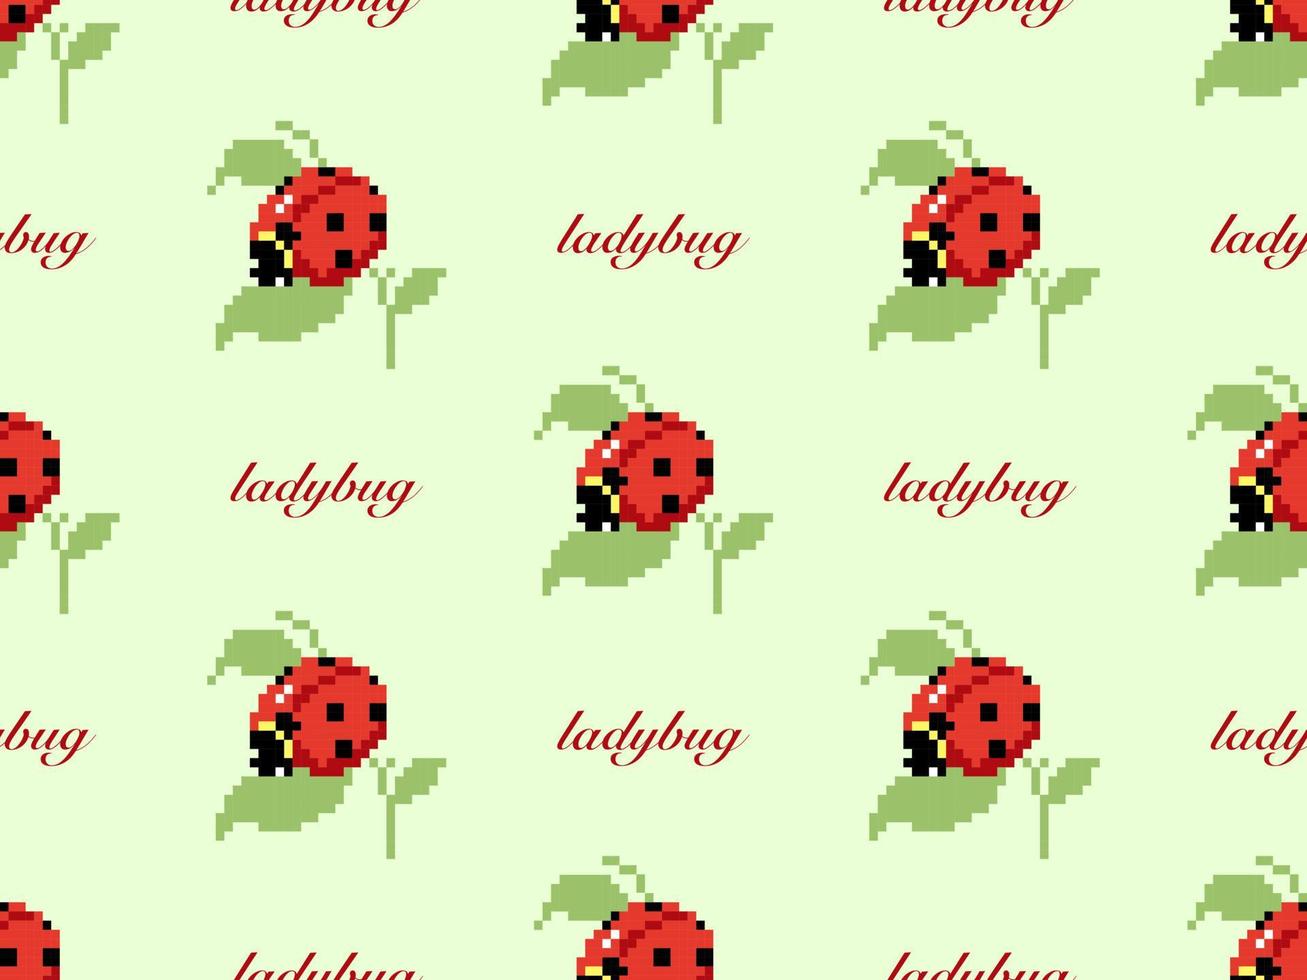 Ladybug cartoon character seamless pattern on green background. Pixel style vector